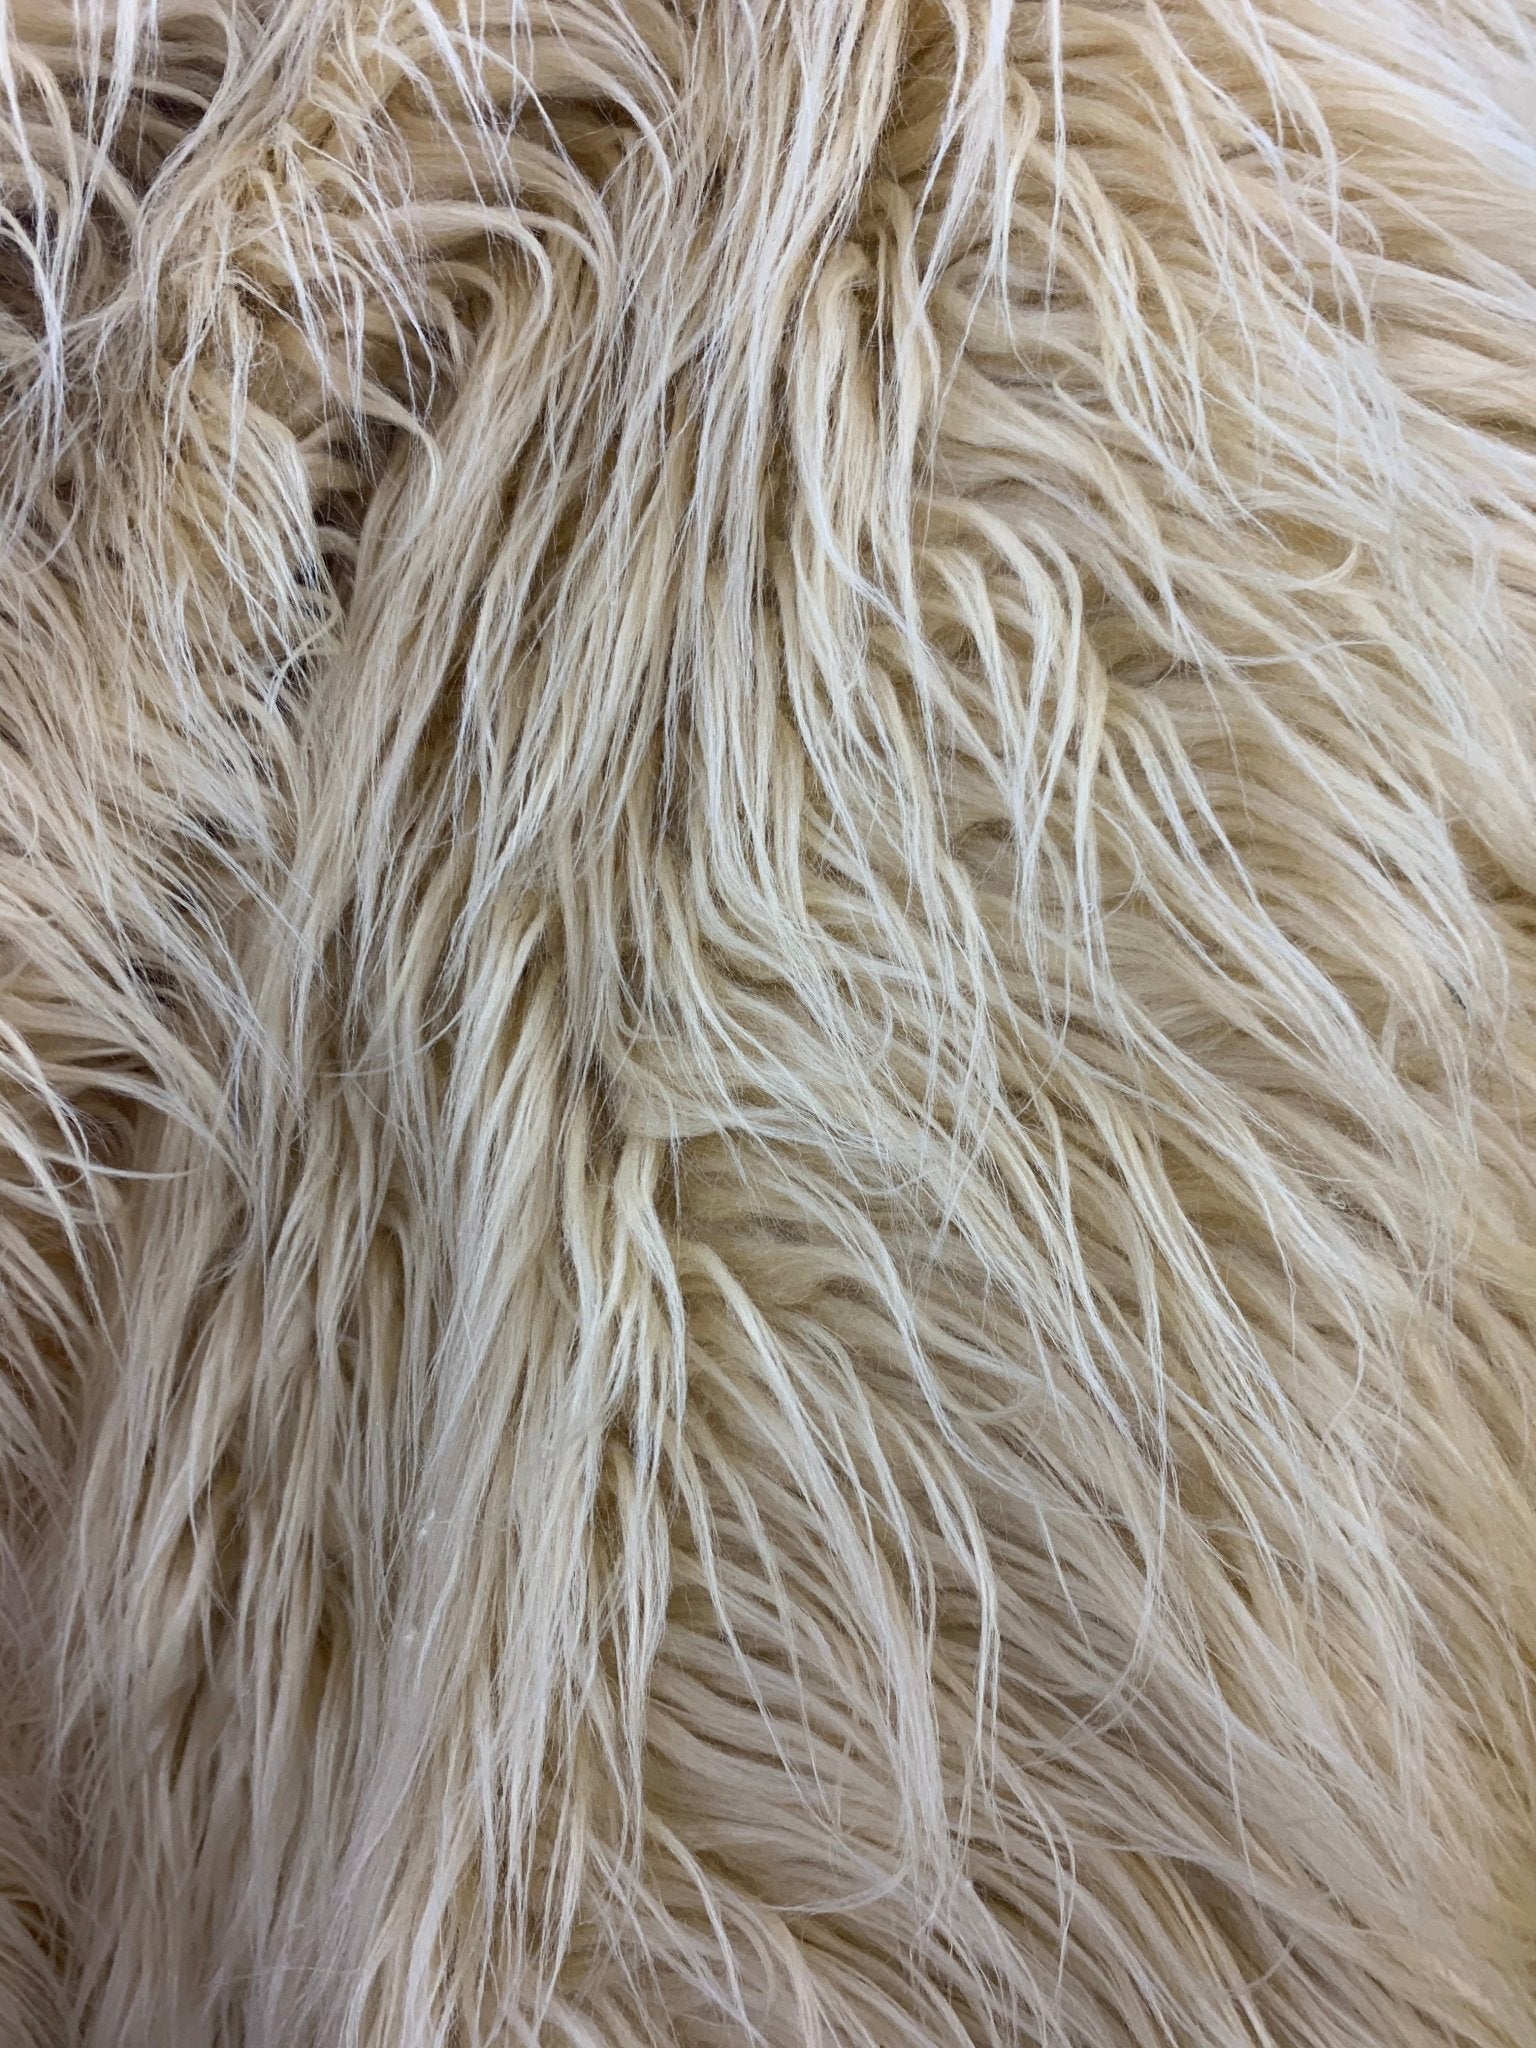 Mongolian Long Pile Fake Faux Fur Fabric Sold By The YardICEFABRICICE FABRICSChampagneBy The Yard (60 inches Wide)Mongolian Long Pile Fake Faux Fur Fabric Sold By The Yard ICEFABRIC